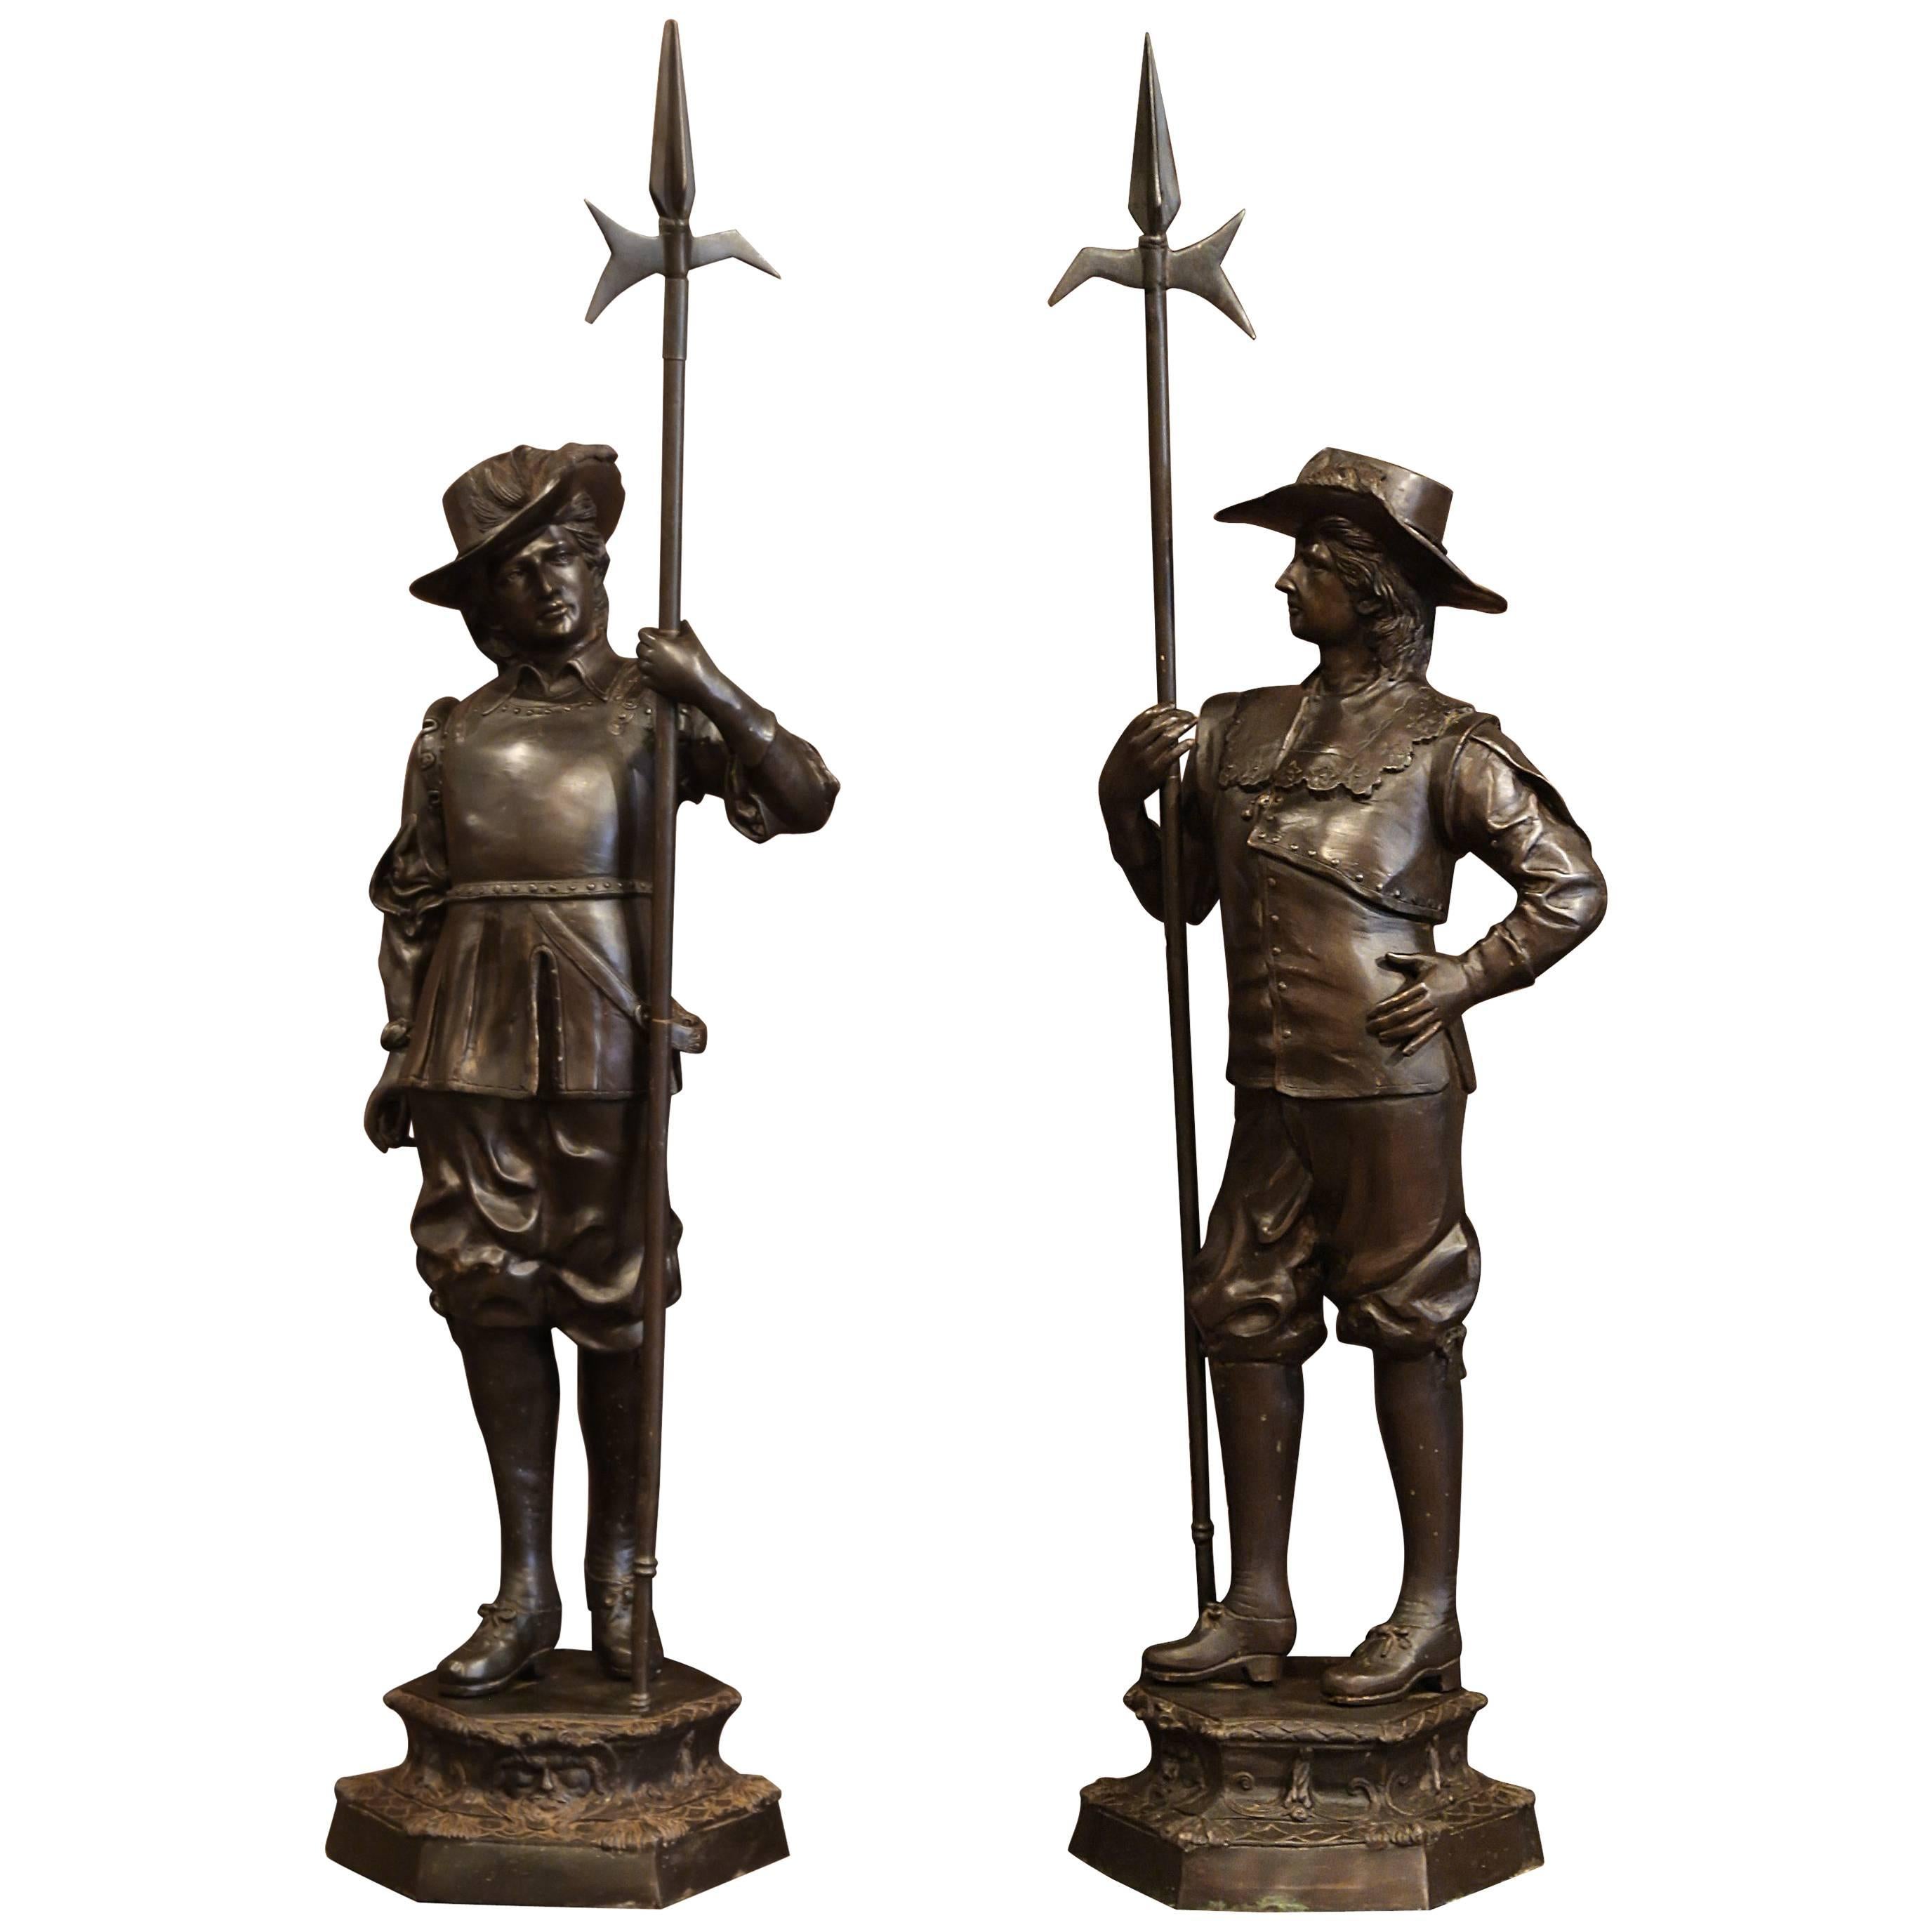 Pair of 19th Century French Patinated Musketeers Sculptures Signed E. Picault